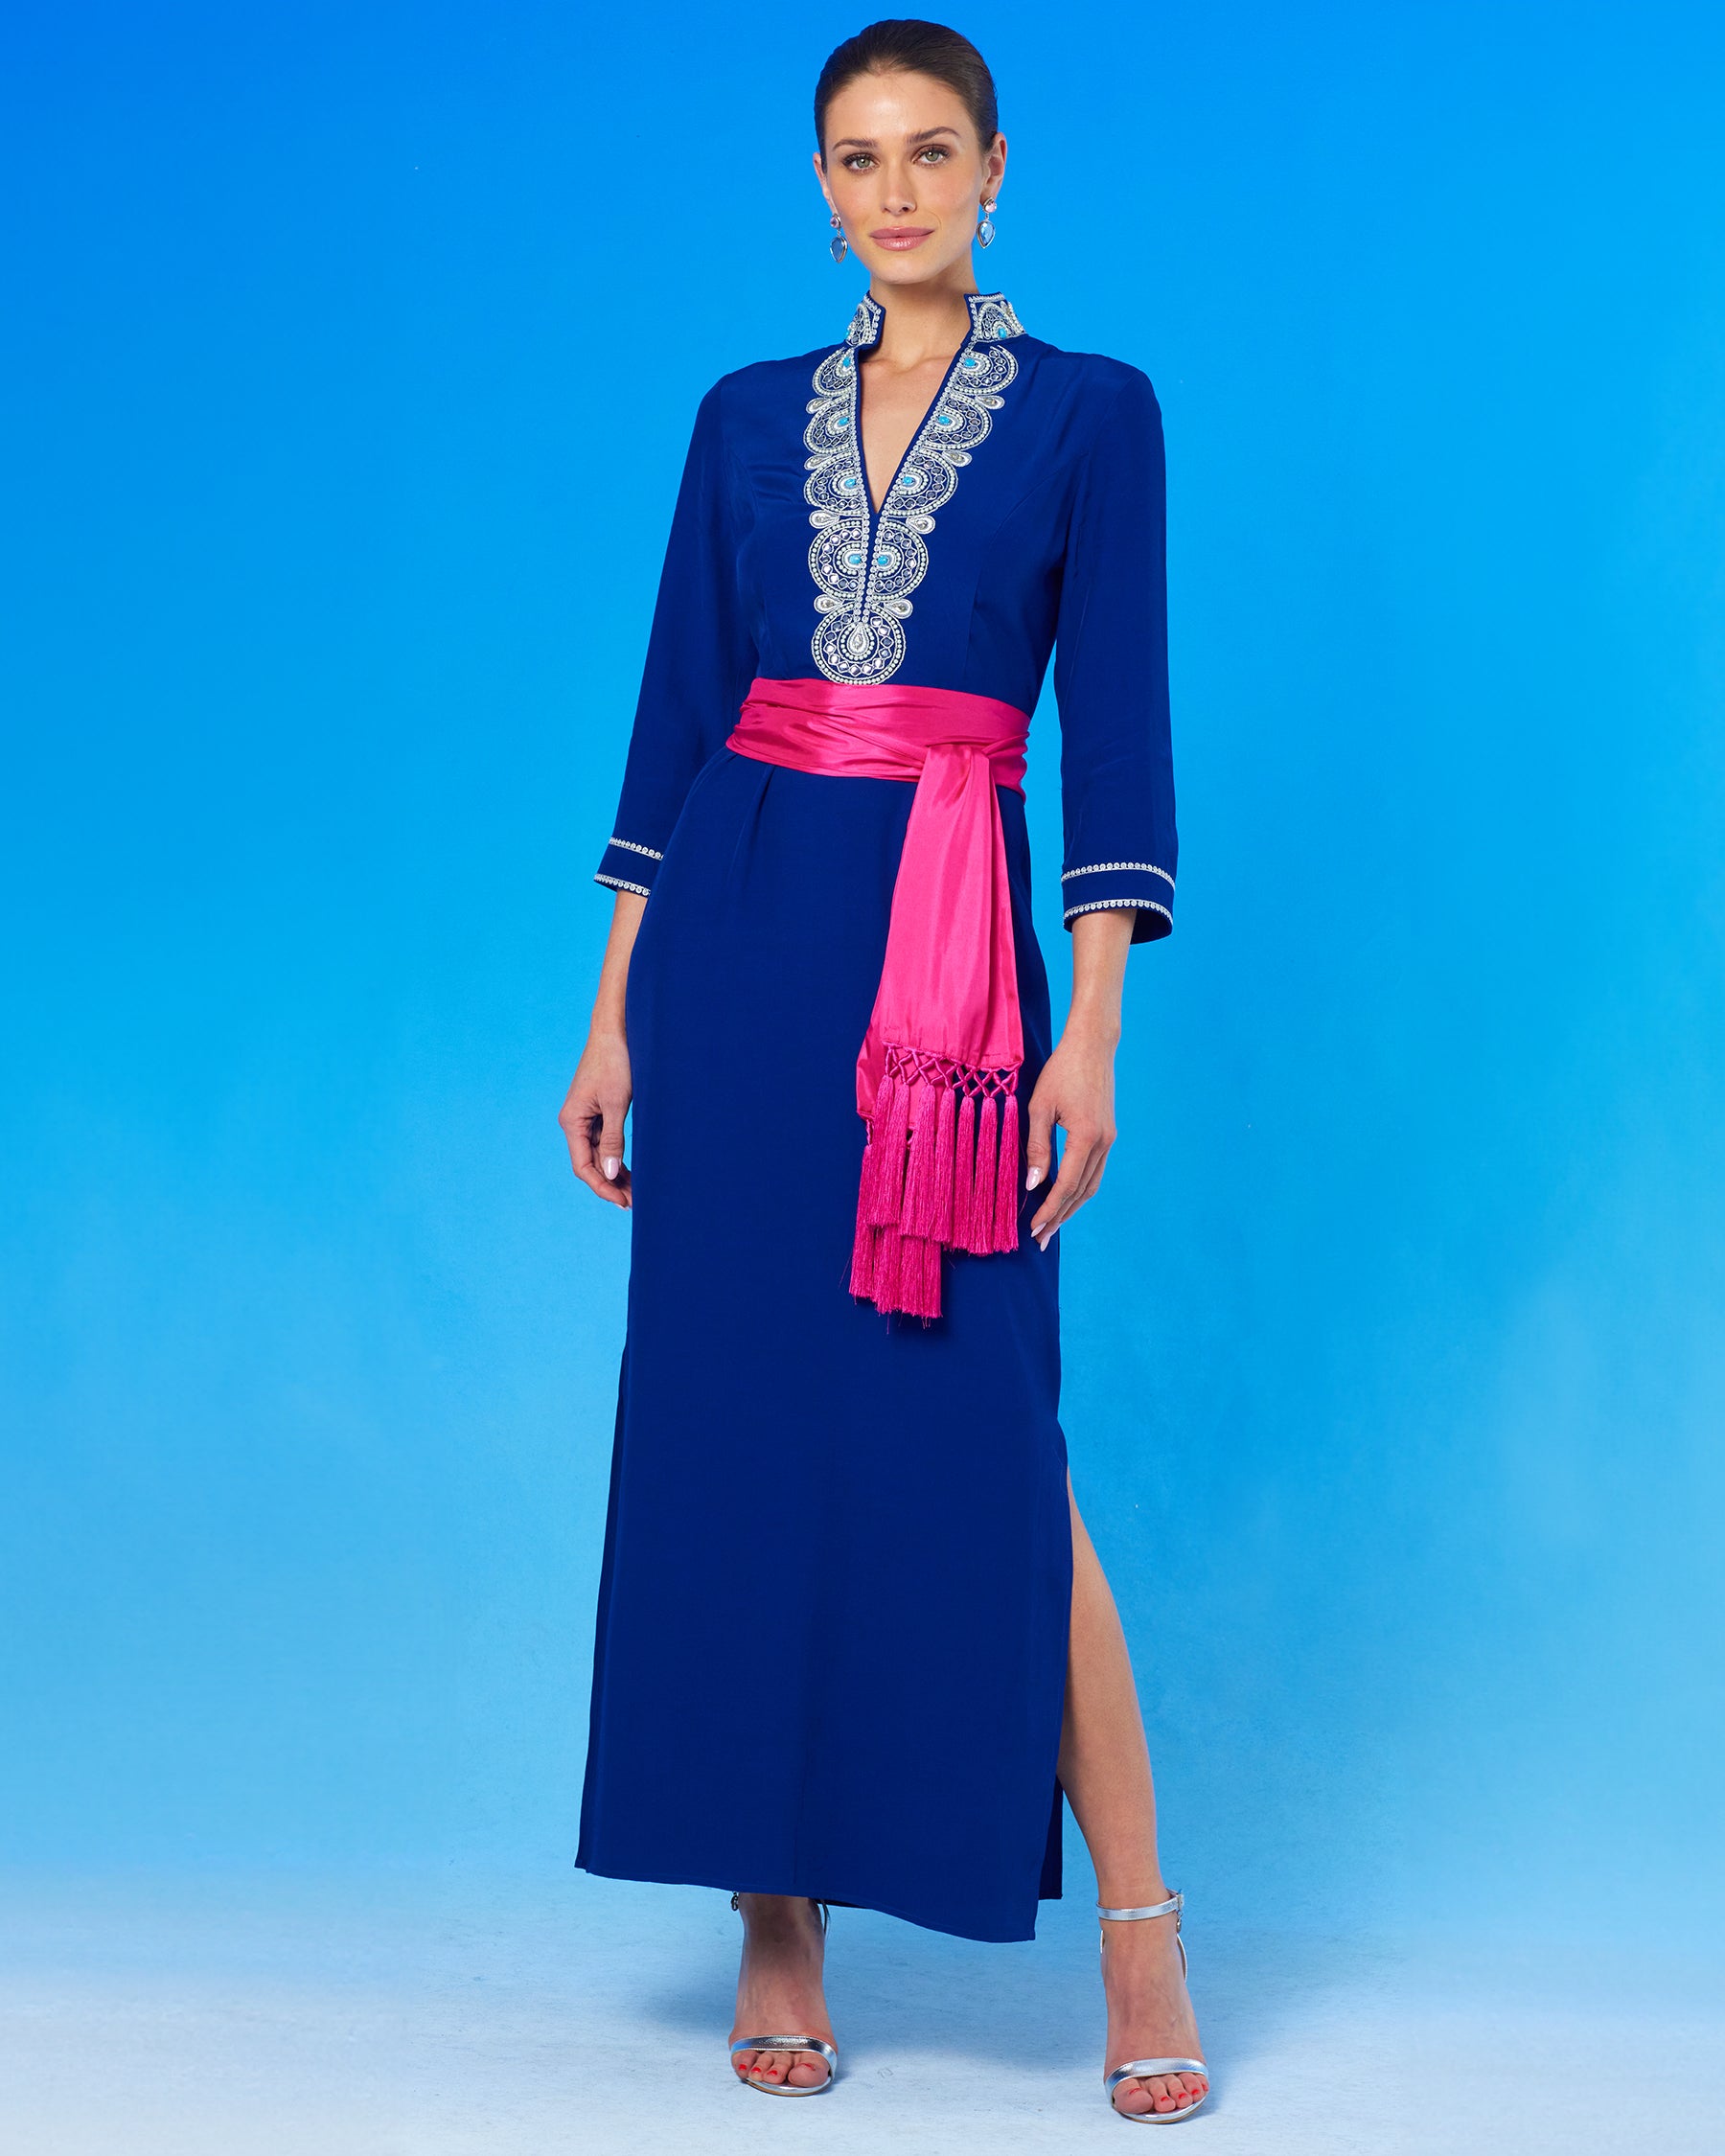 Cosima Sash Belt in Fuchsia Hot Pink worn with the Noor Long Navy Tunic Dress with Silver Embellishment